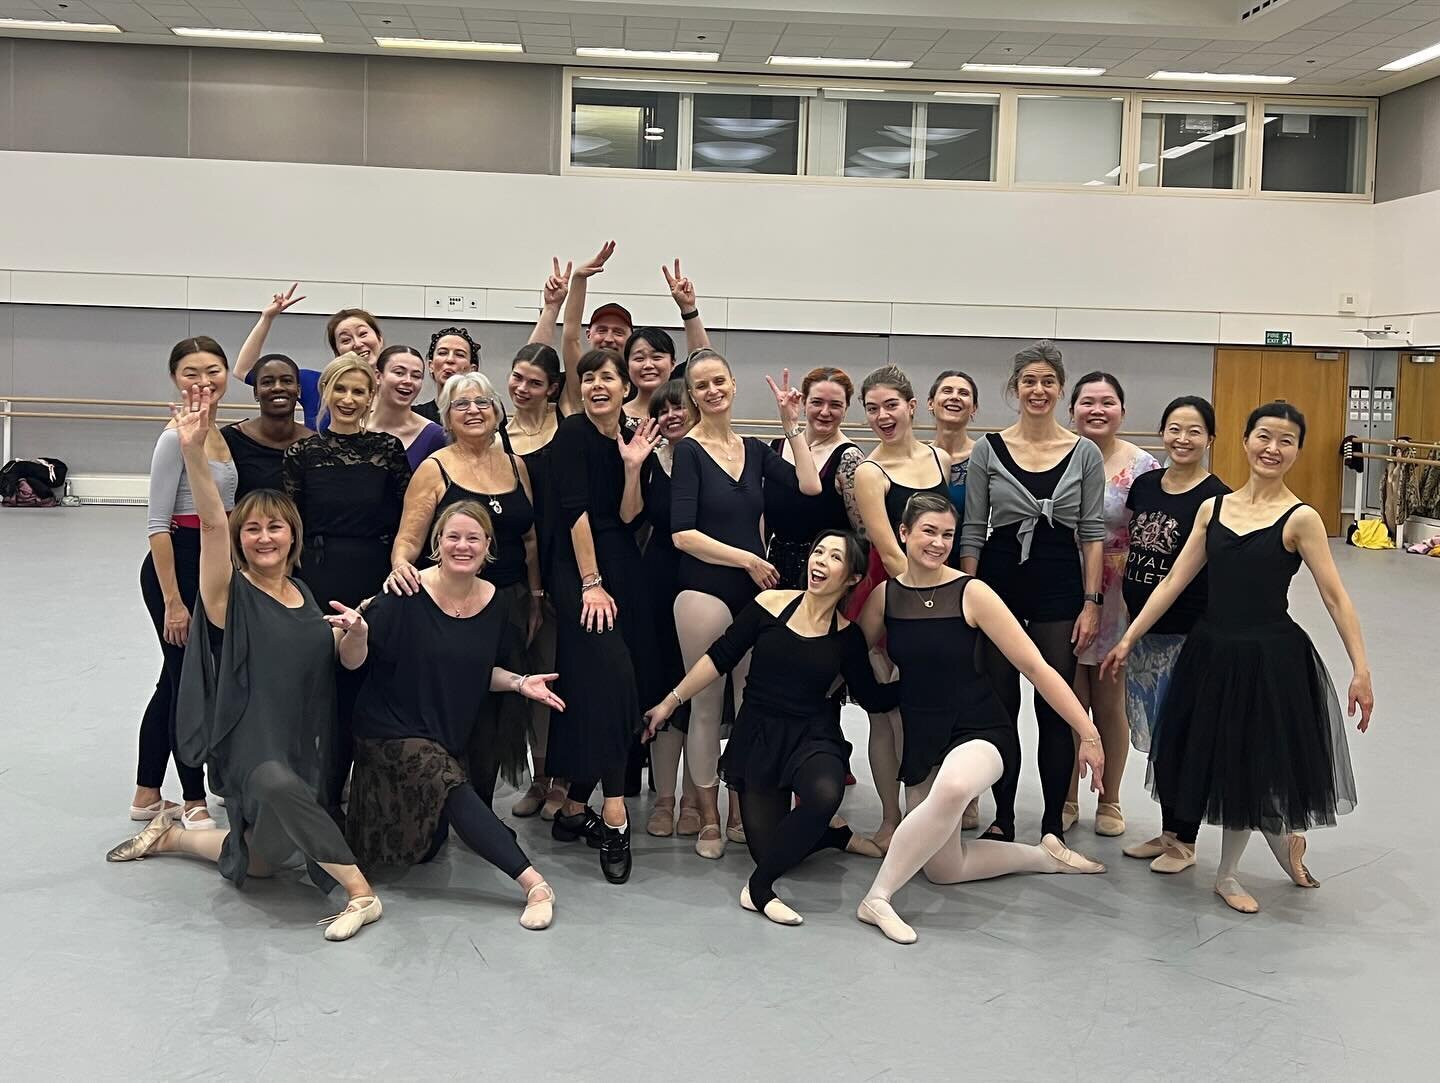 Remembering back to last weekend. I genuinely felt that there was a warm, caring and giving vibe going on for our Manon Workshop Weekend with two impeccable coaches, @darceybussellofficial and @akanetakane and on the keys, Olga Mazour and @mari.jones